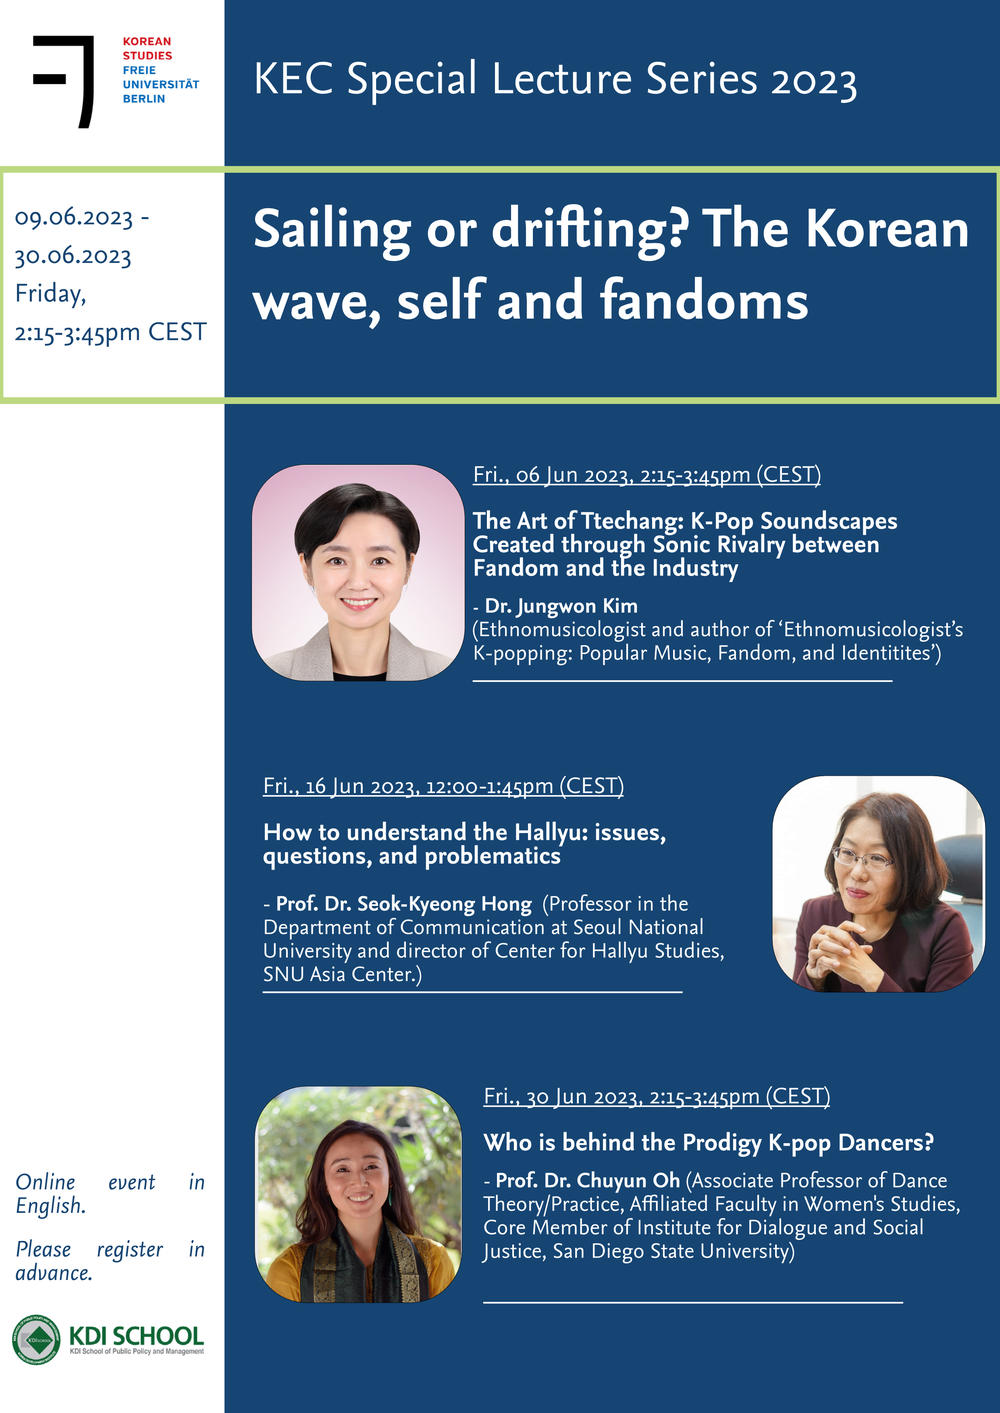 KEC Special Lecture Series - Sailing or Drifting? The Korean Wave, self and fandoms